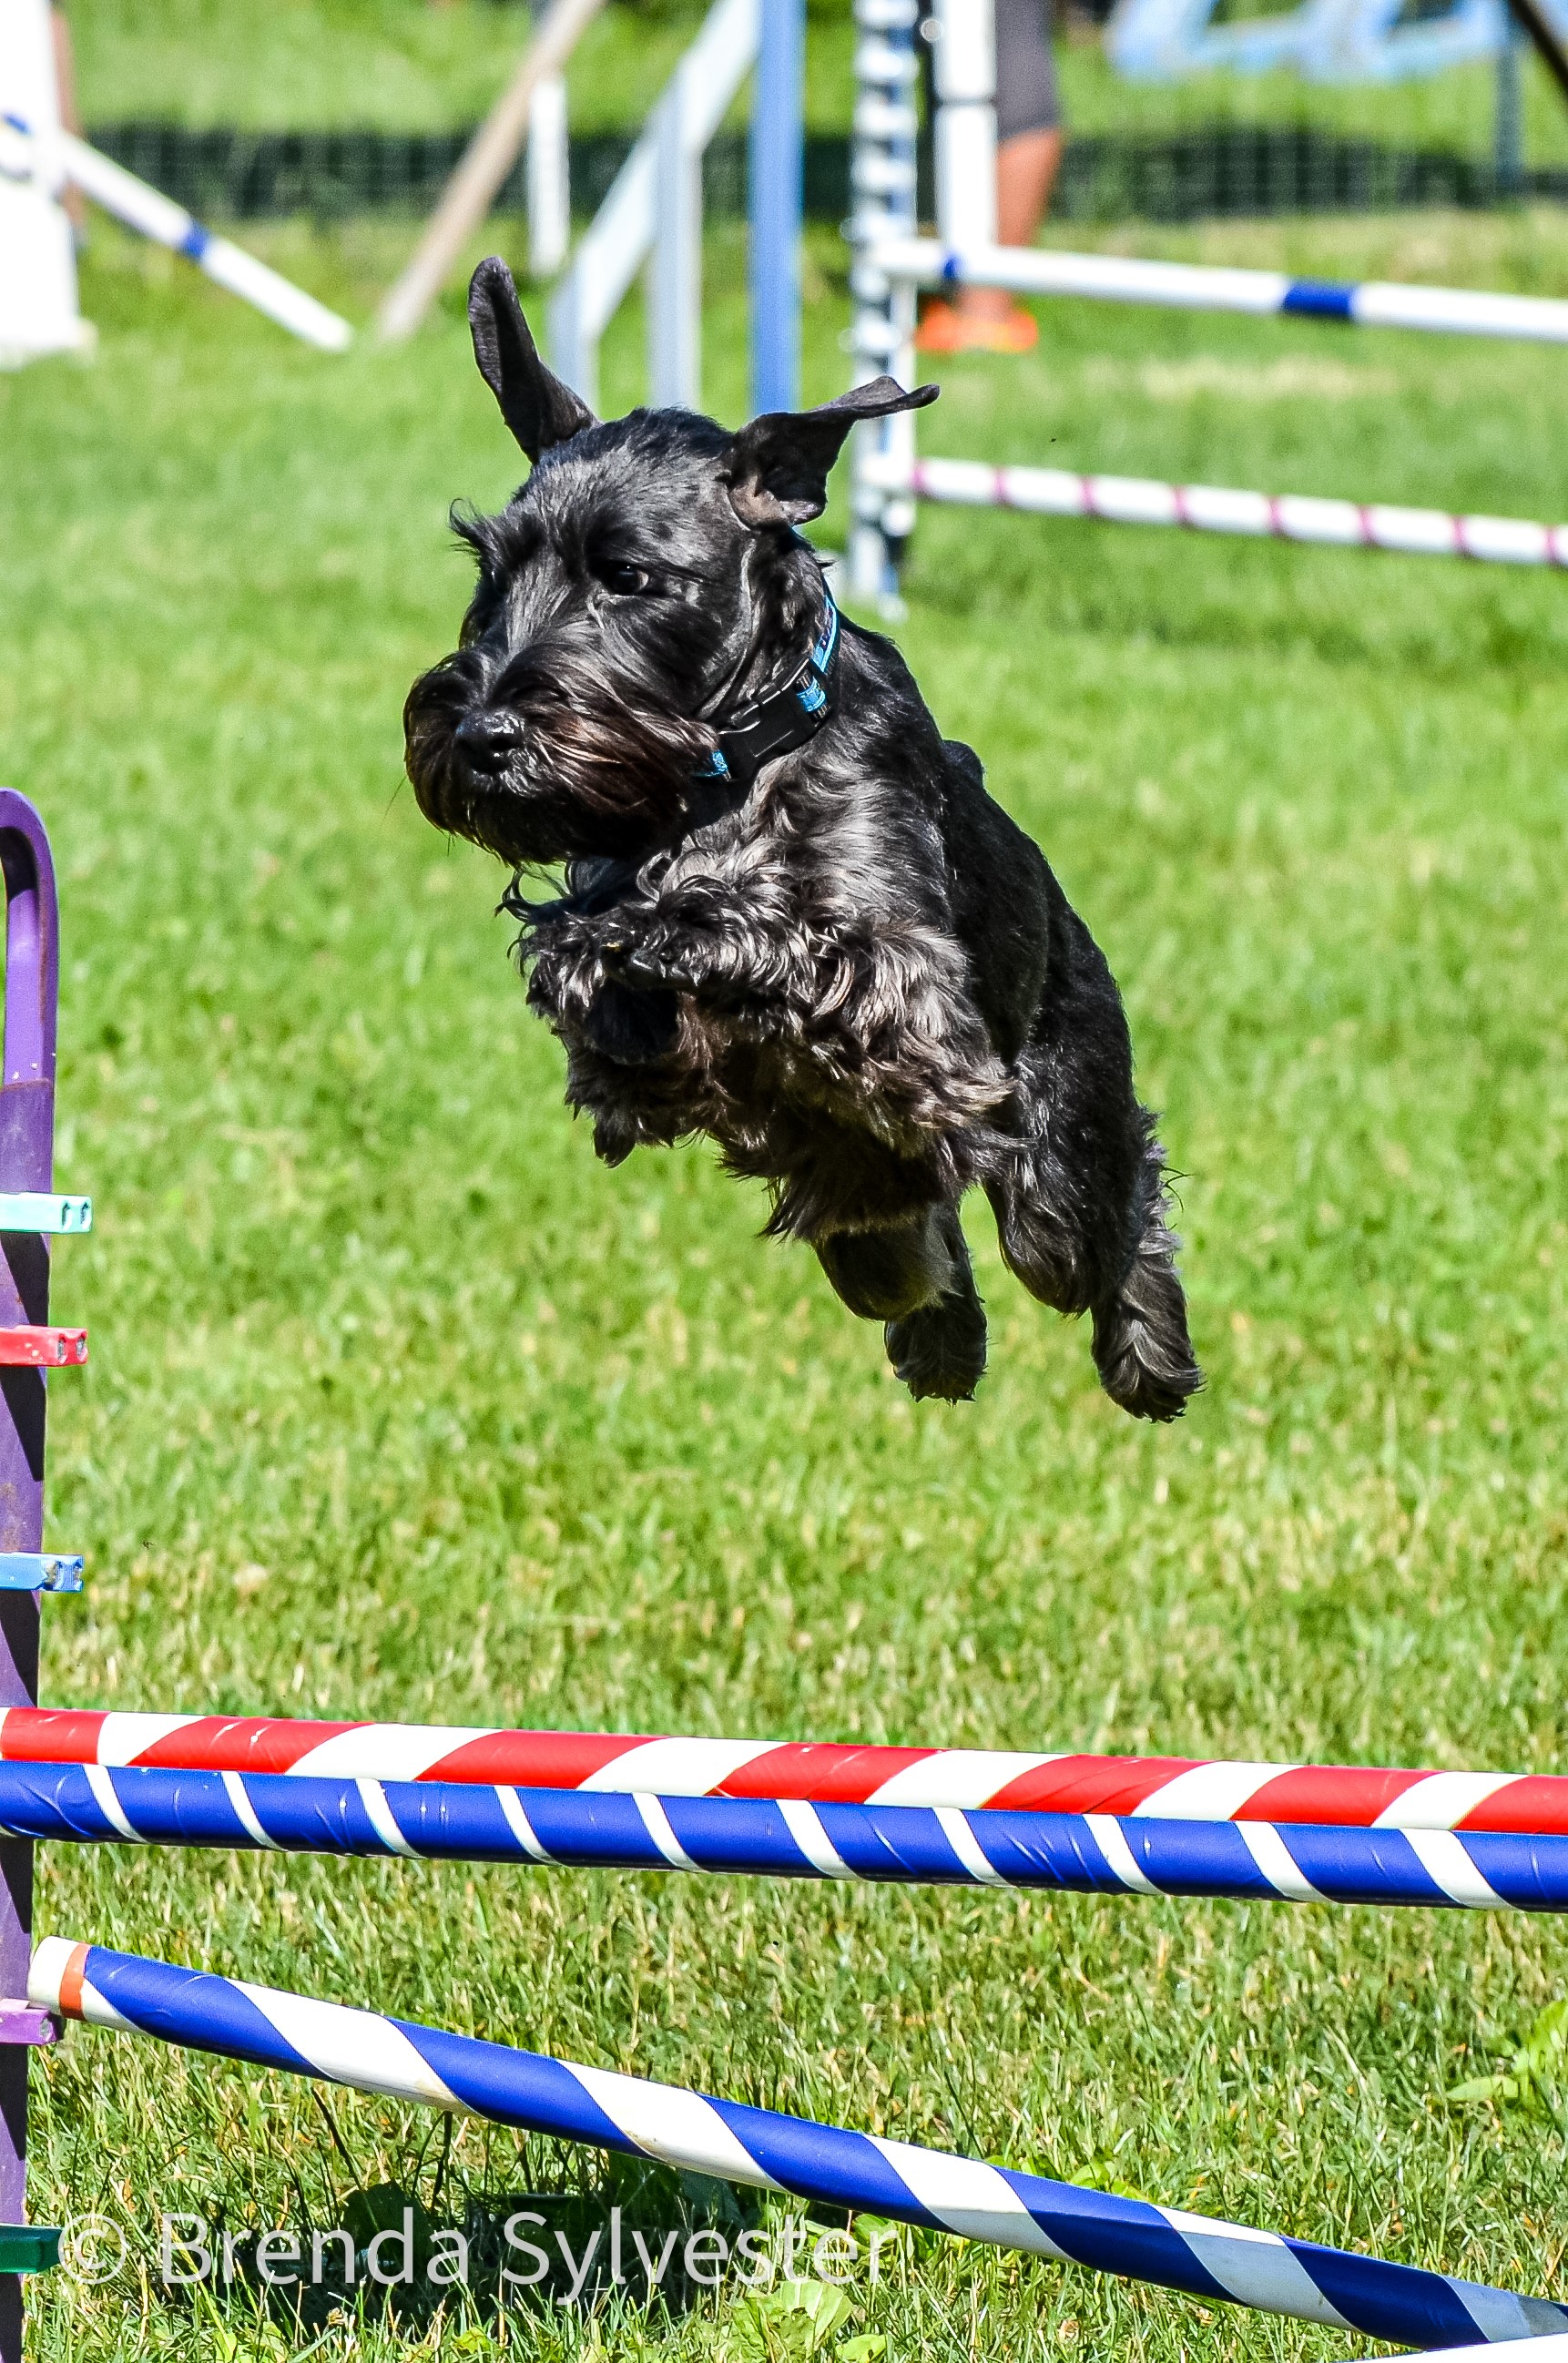 A dog jumps over a hurdle at an agility event.